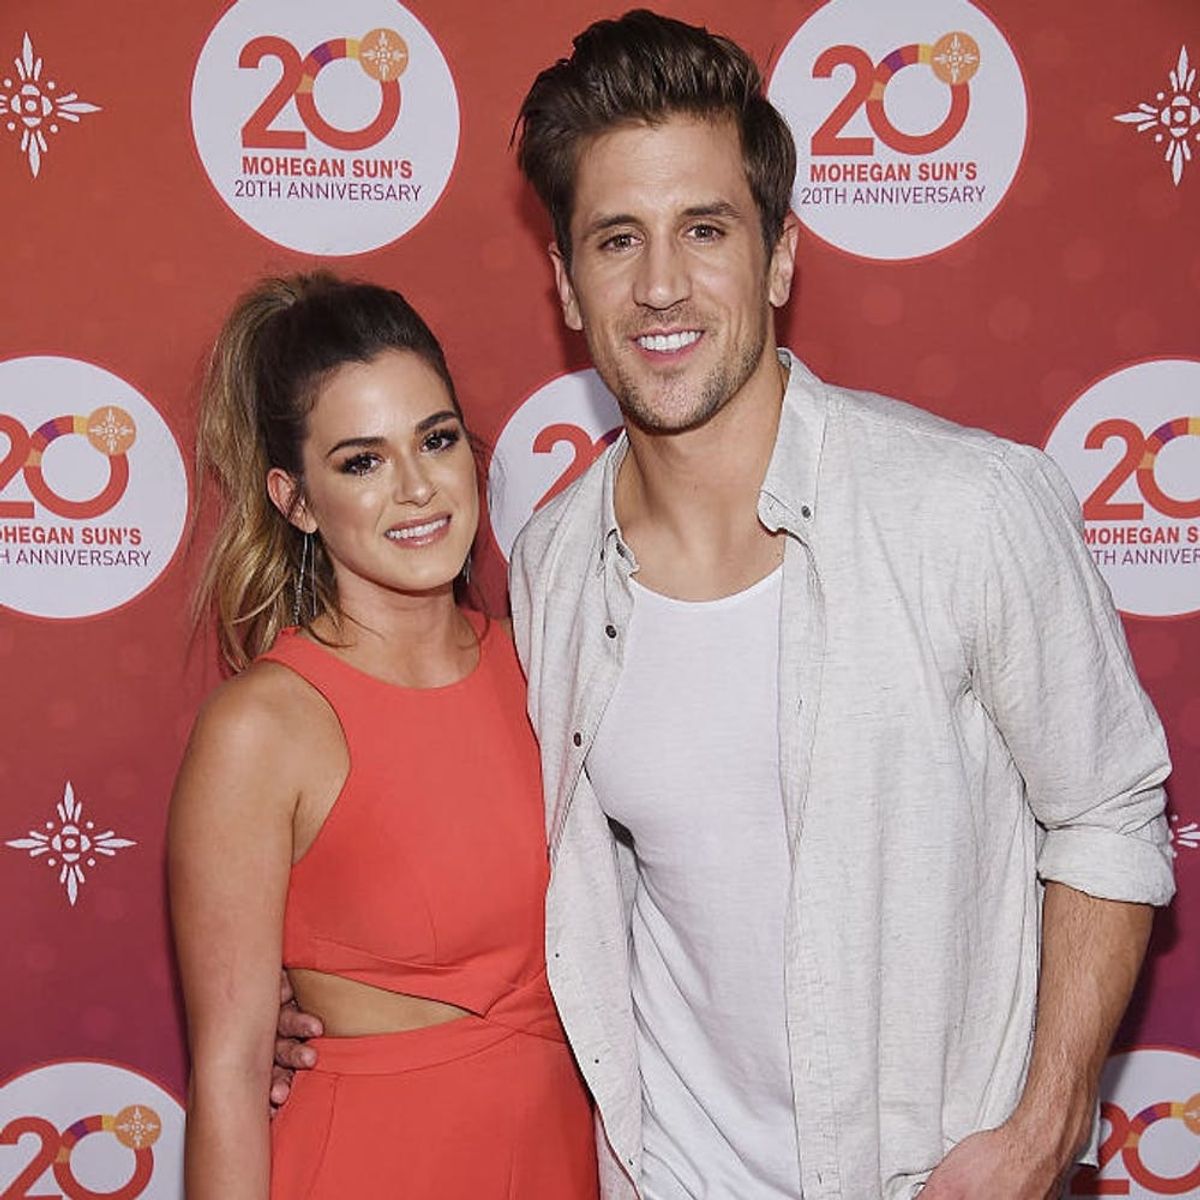 JoJo Fletcher Says She’ll Marry Jordan Rodgers “When the Timing Is Right”